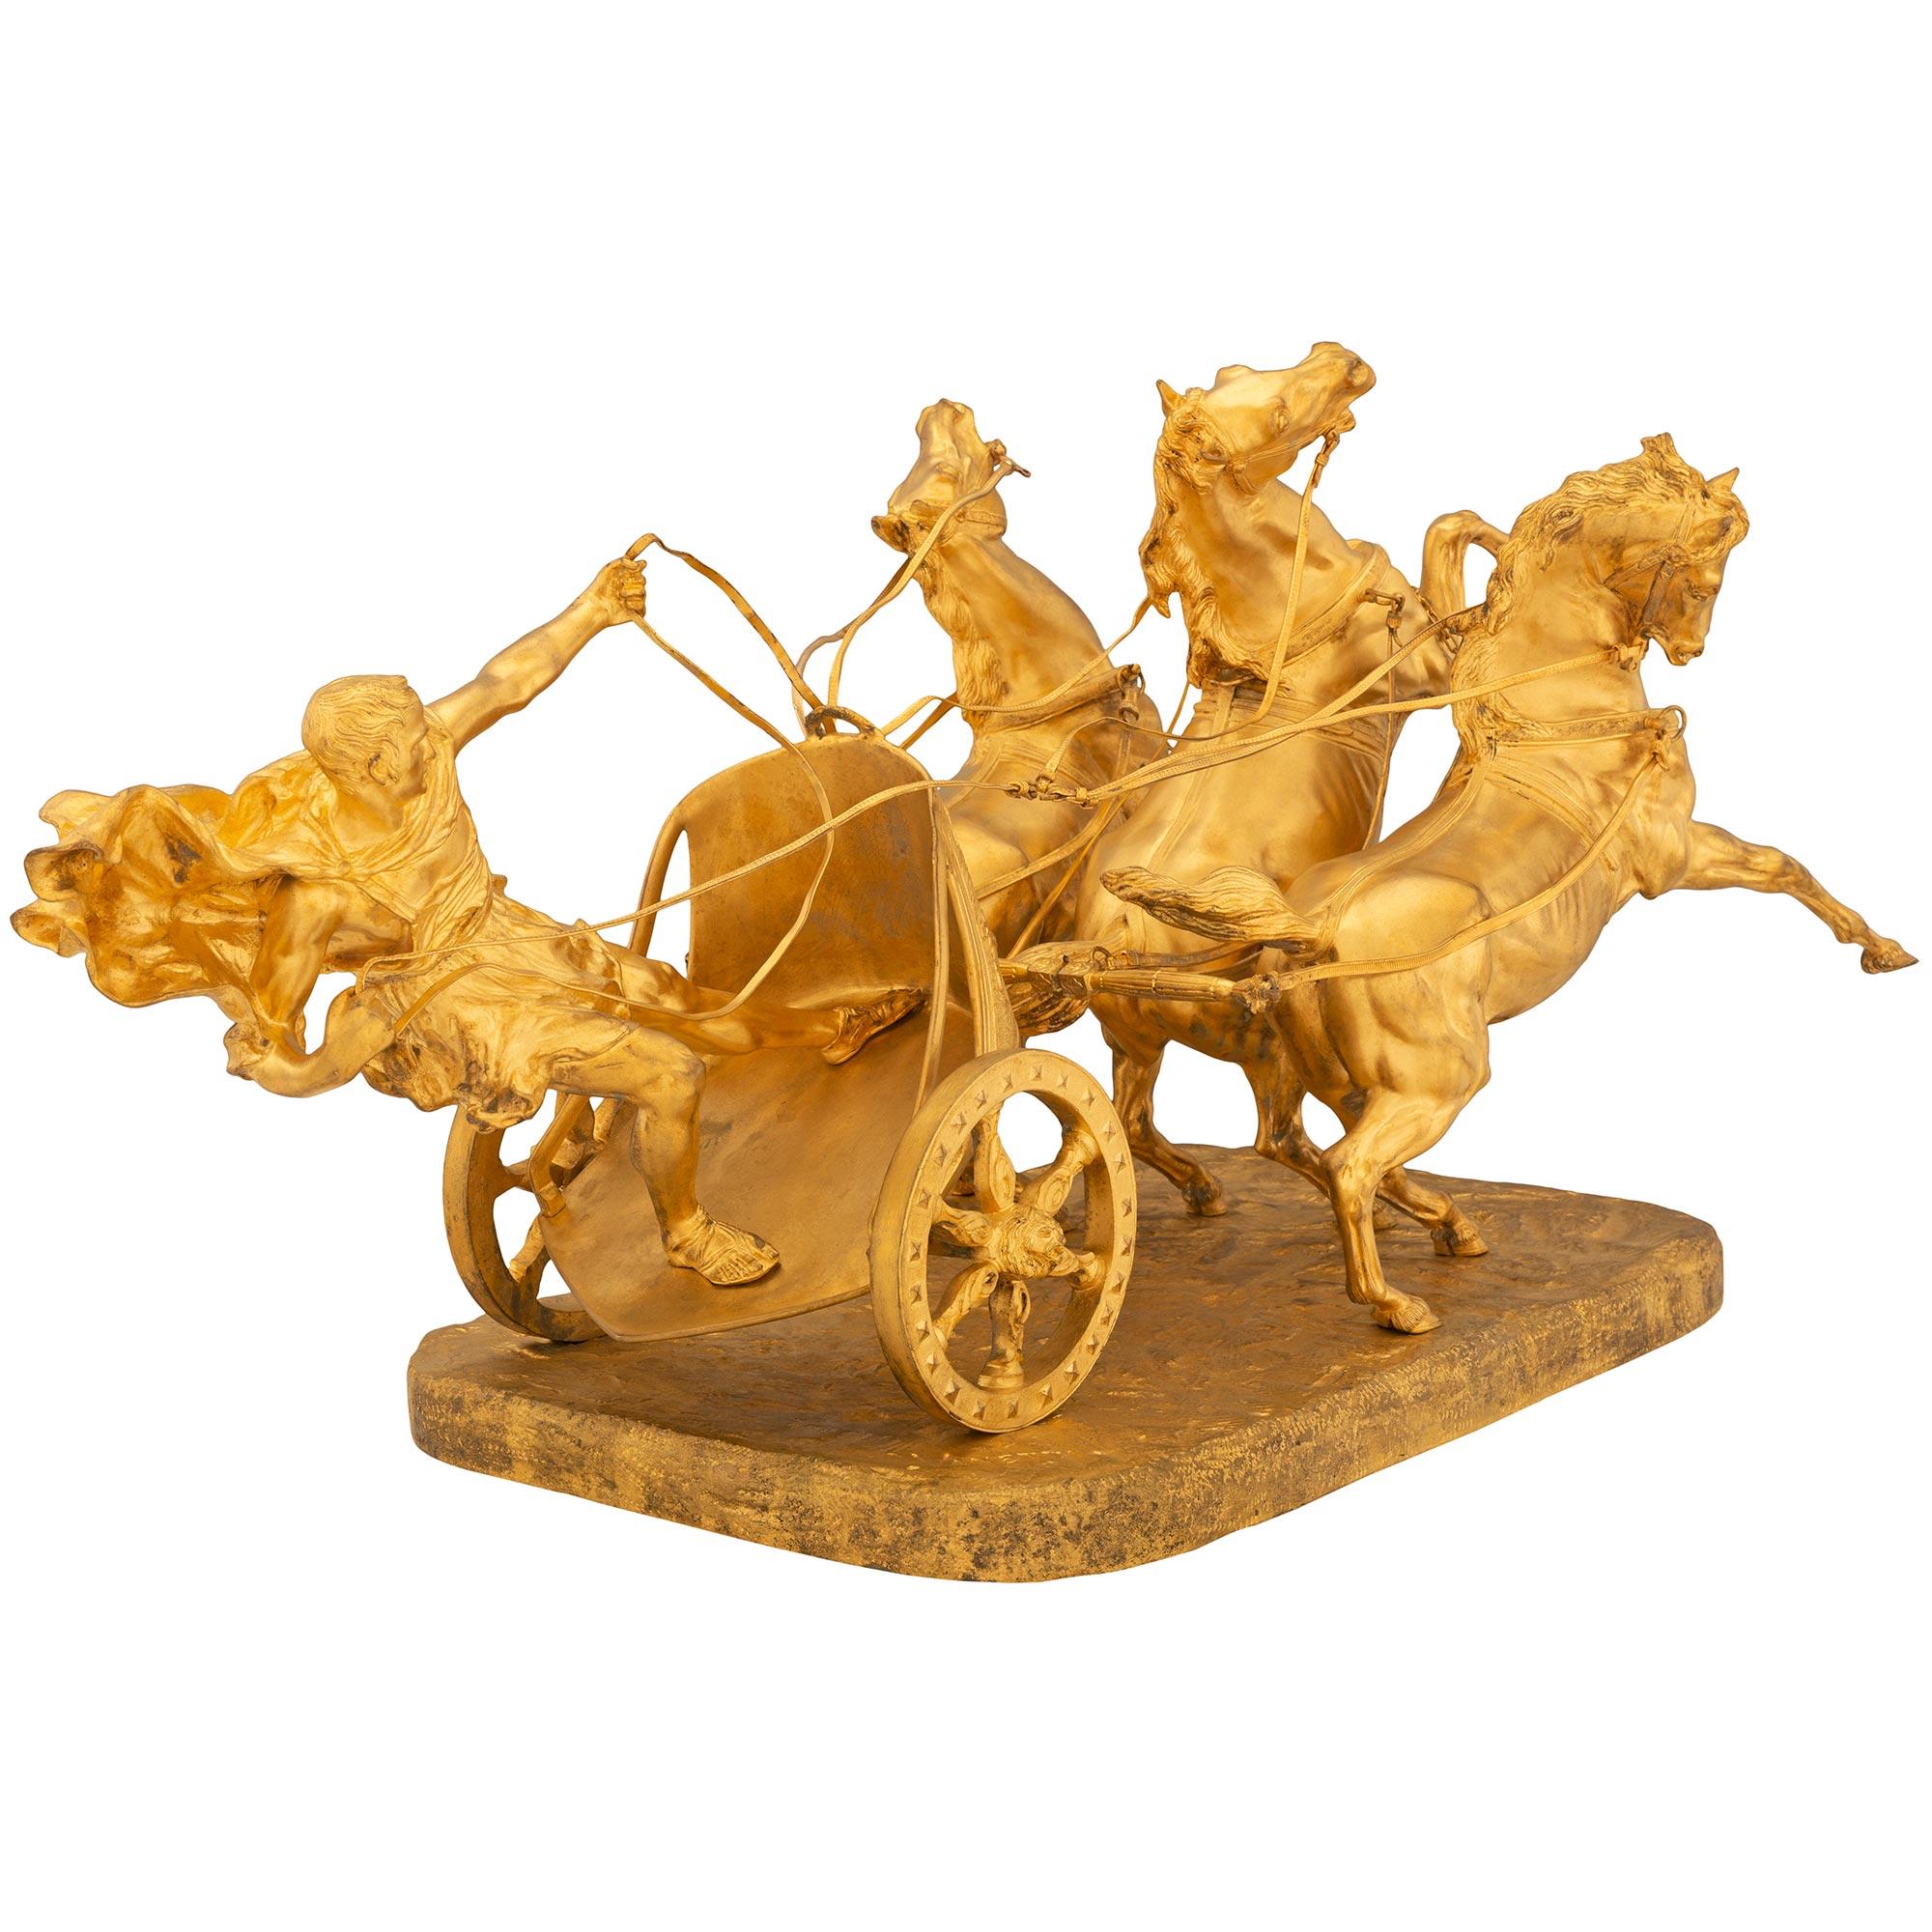 An impressive and extremely high quality Italian 19th century ormolu statue signed Vanetti. The statue is raised by a rectangular base with a wonderfully executed ground design where a Roman gladiator is riding his chariot pulled by three horses. He